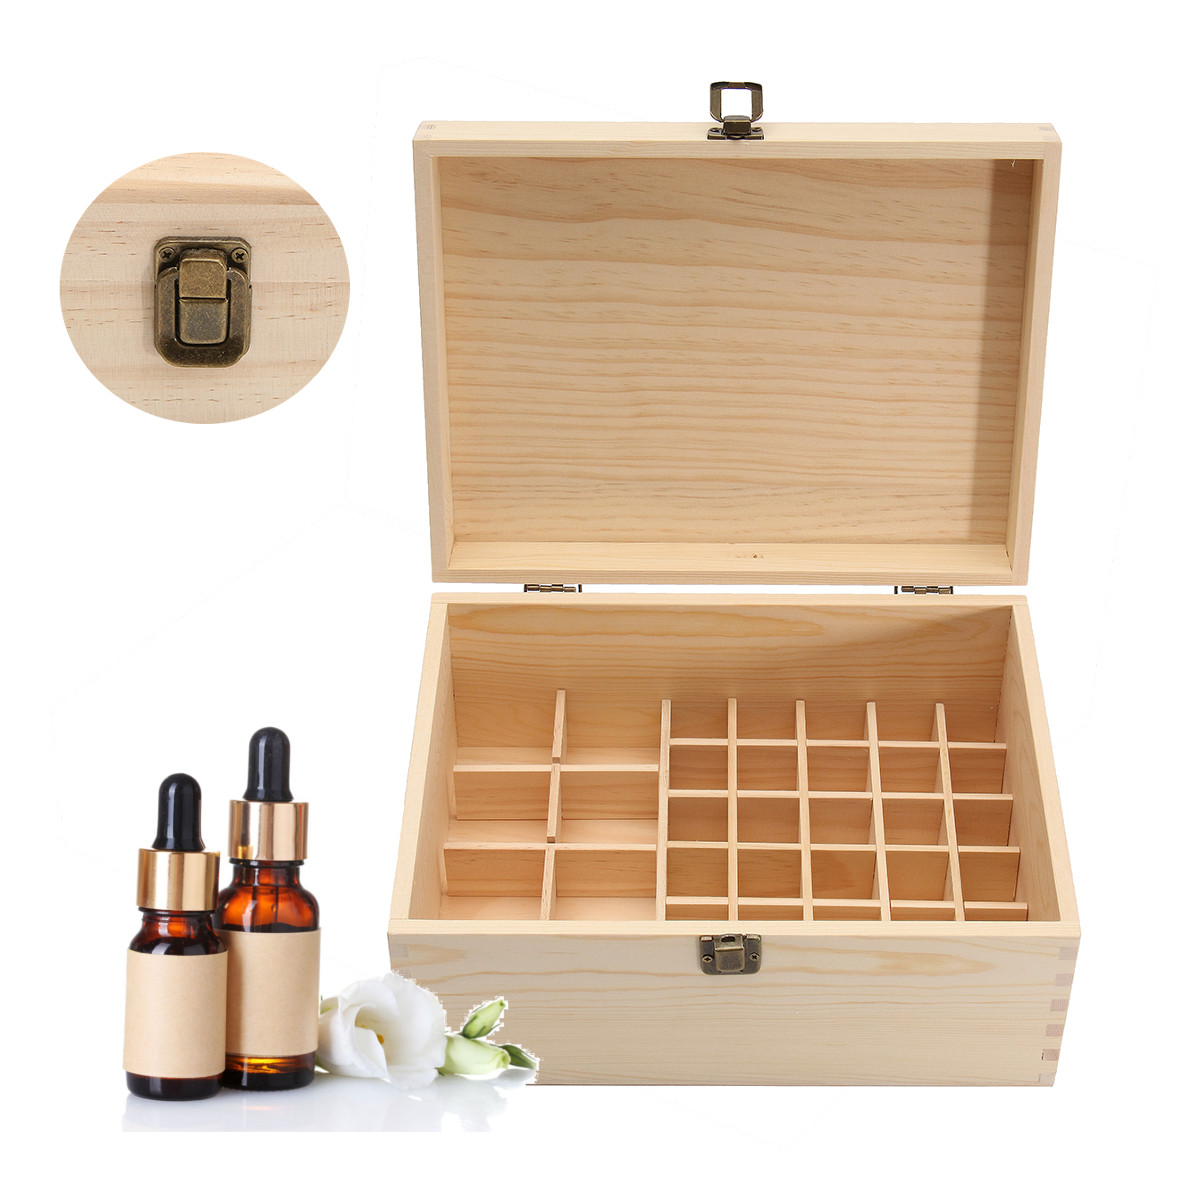 

38 Grids Wooden Bottles BoxContainer Organizer Storage for Essential Oil Aromatherapy